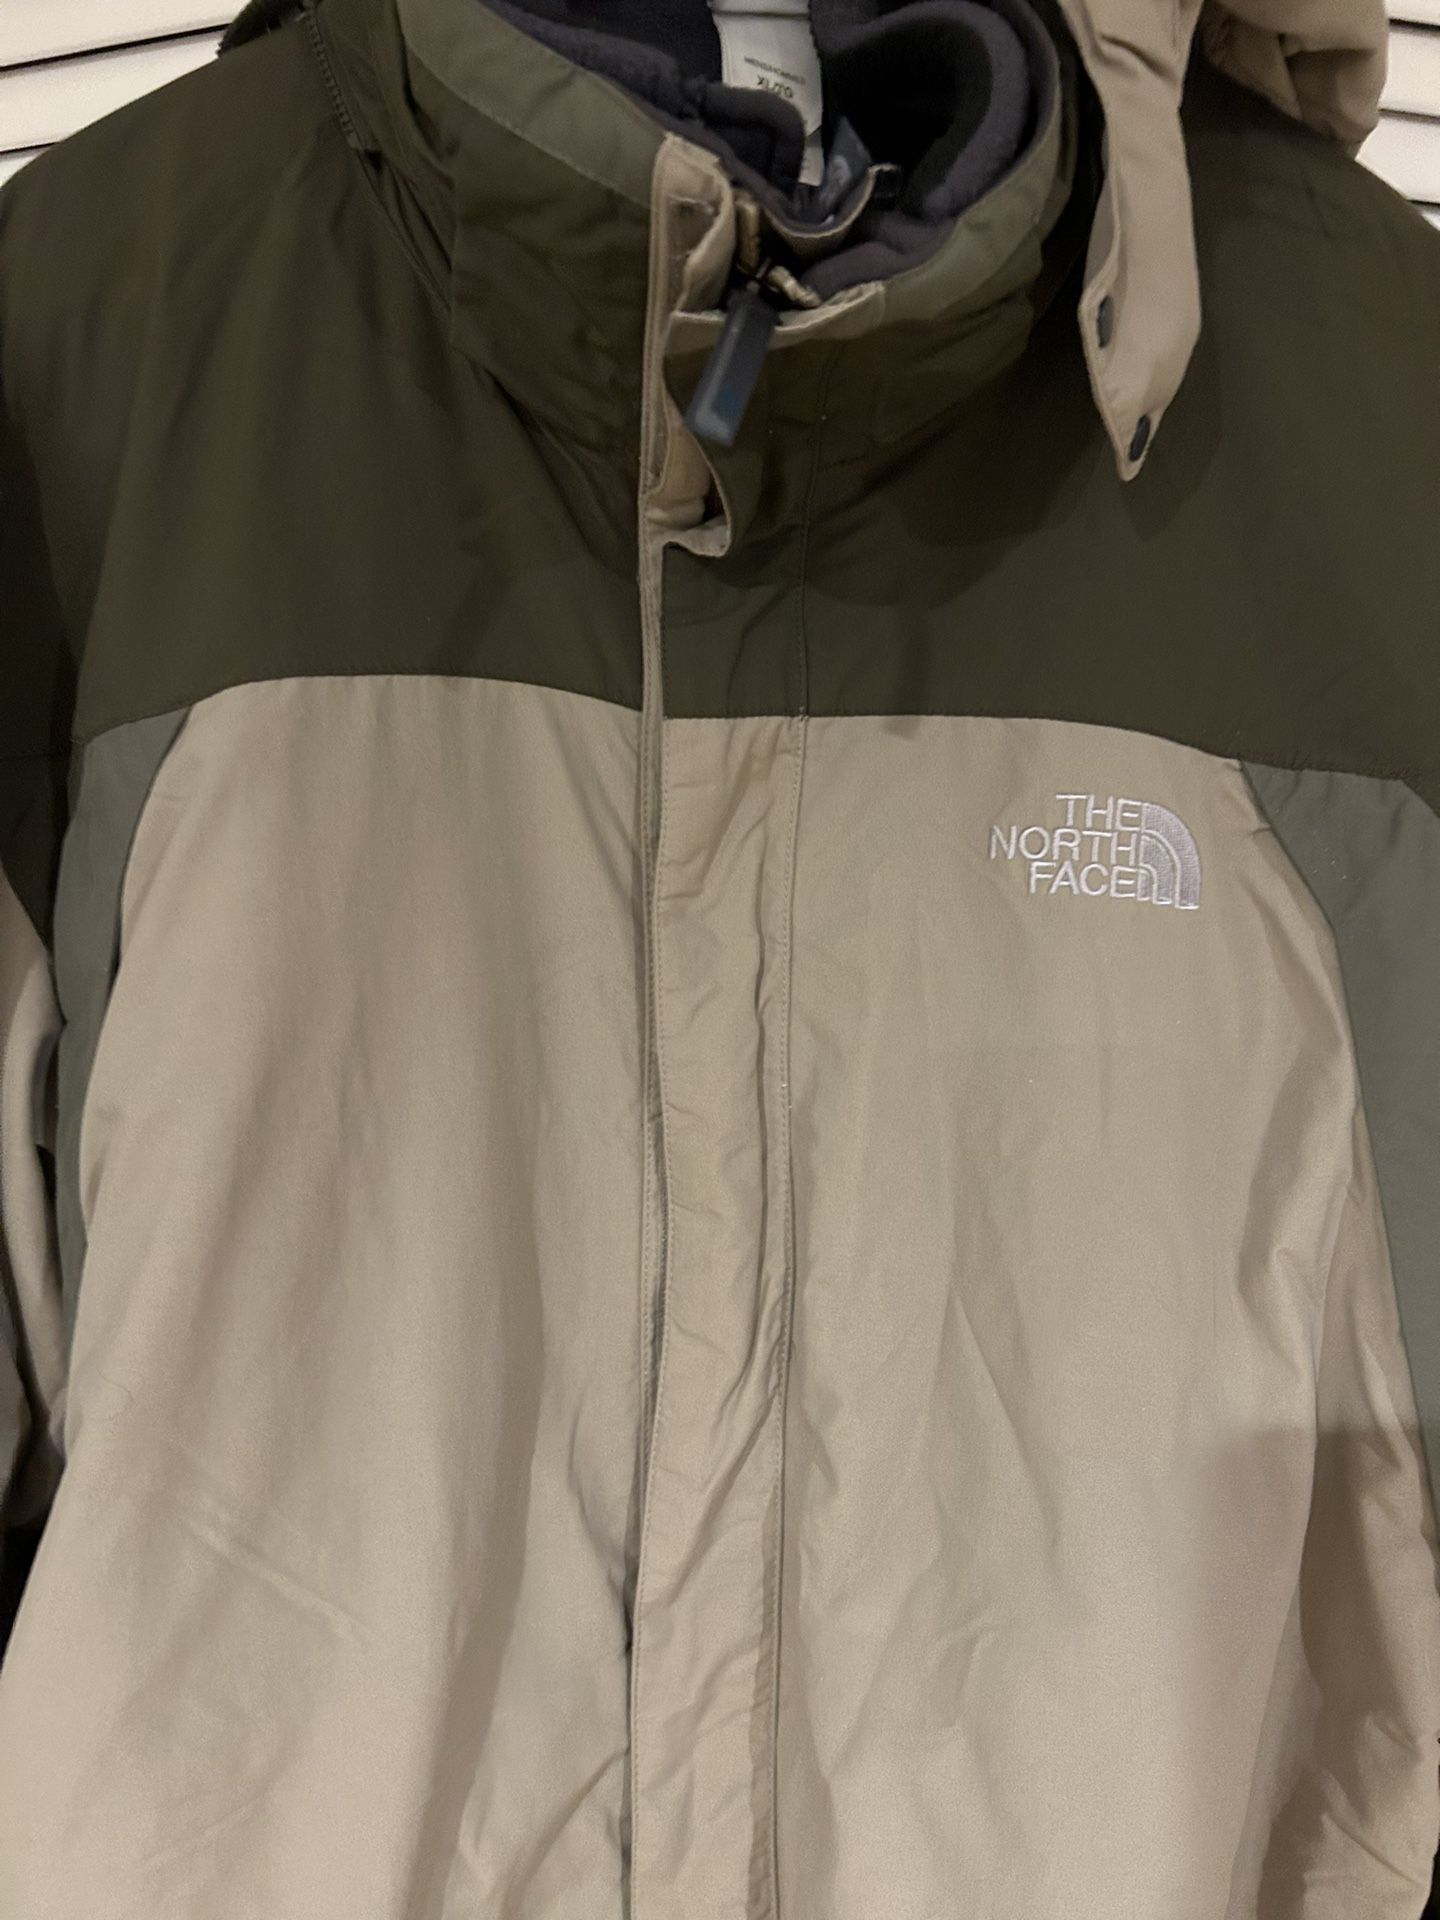 THE NORTH FACE Men's Triclimate Waterproof Jacket.